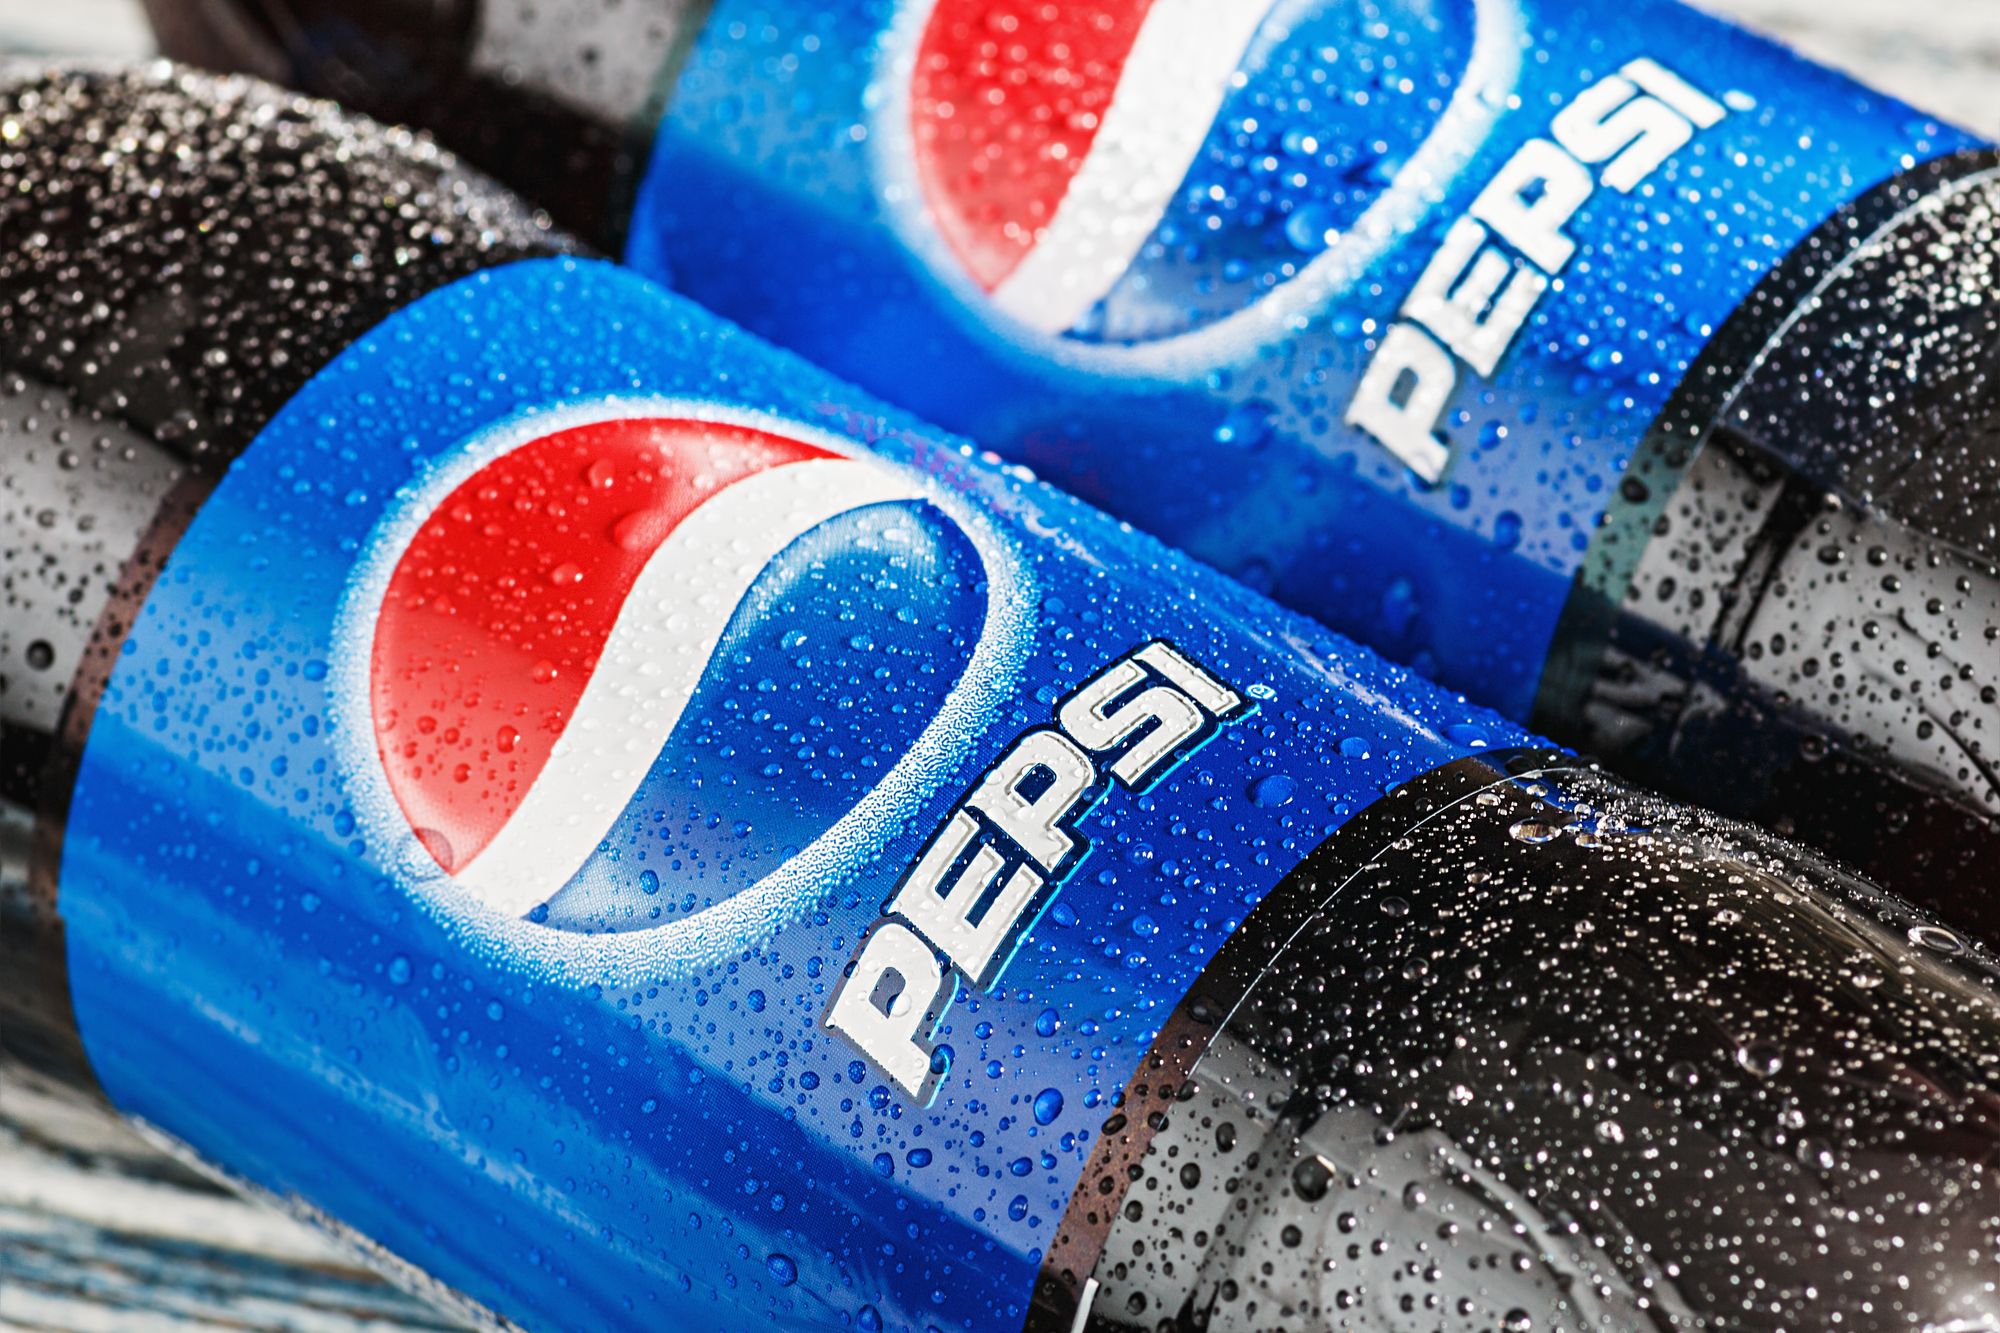 Moscow, Russia - April 10, 2014: Plastic bottle with cola drink Pepsi. Pepsi-Cola soft soft drink sold worldwide. Rights to the trademark "Pepsi-Cola&qu ot; owned American company PepsiCo.